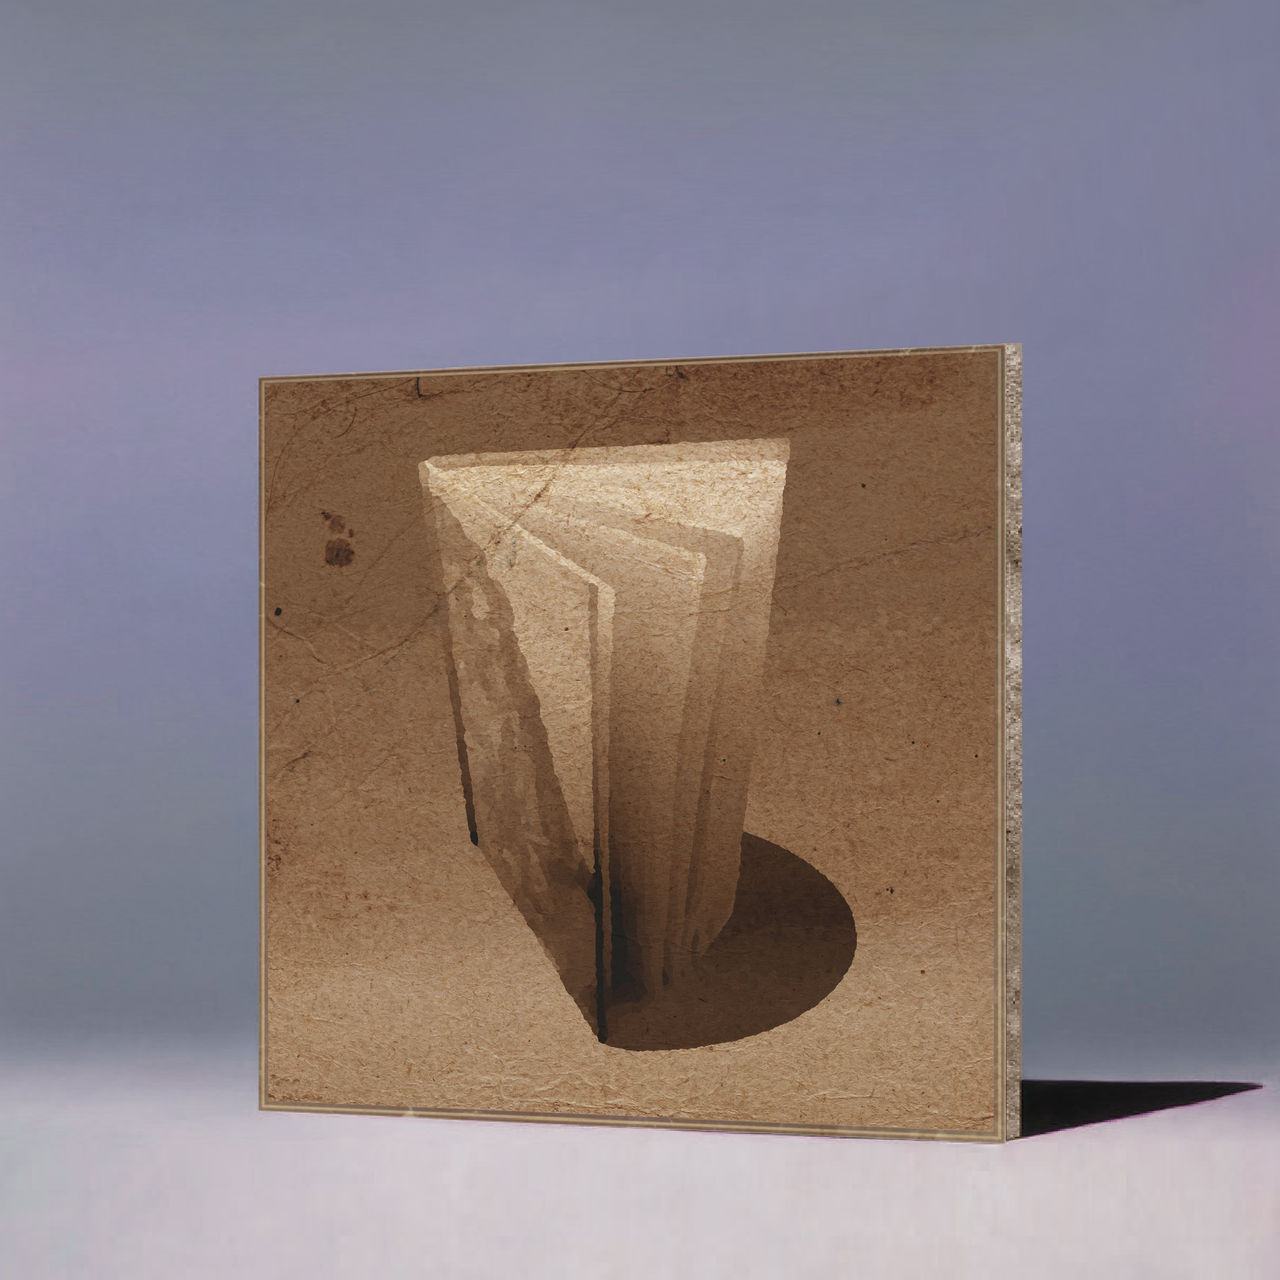 The Caretaker – Everywhere At The End Of Time: Stage 4 – Fluid Radio